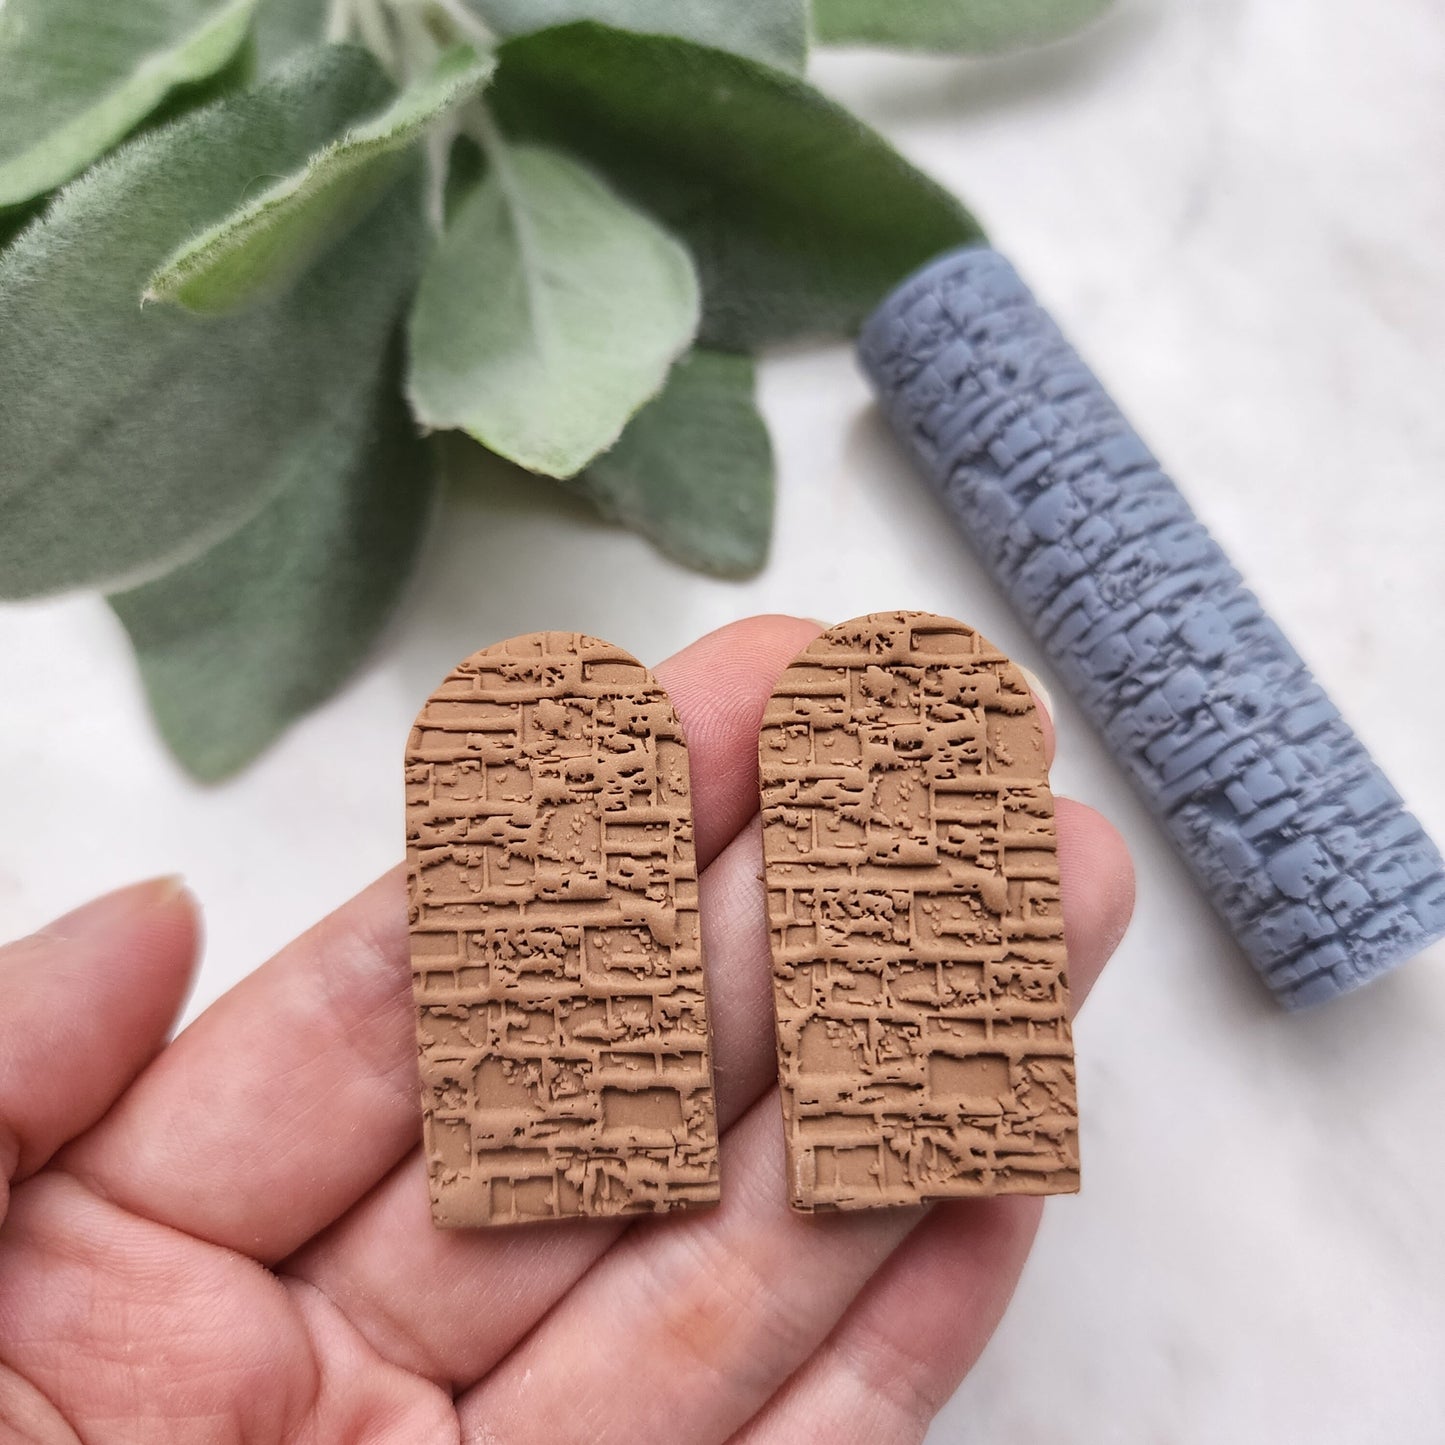 Polymer clay texture roller clay stamp 3D printed embossing tool "Brick texture" Clay tool Polymer clay supplies Jewelry supplies